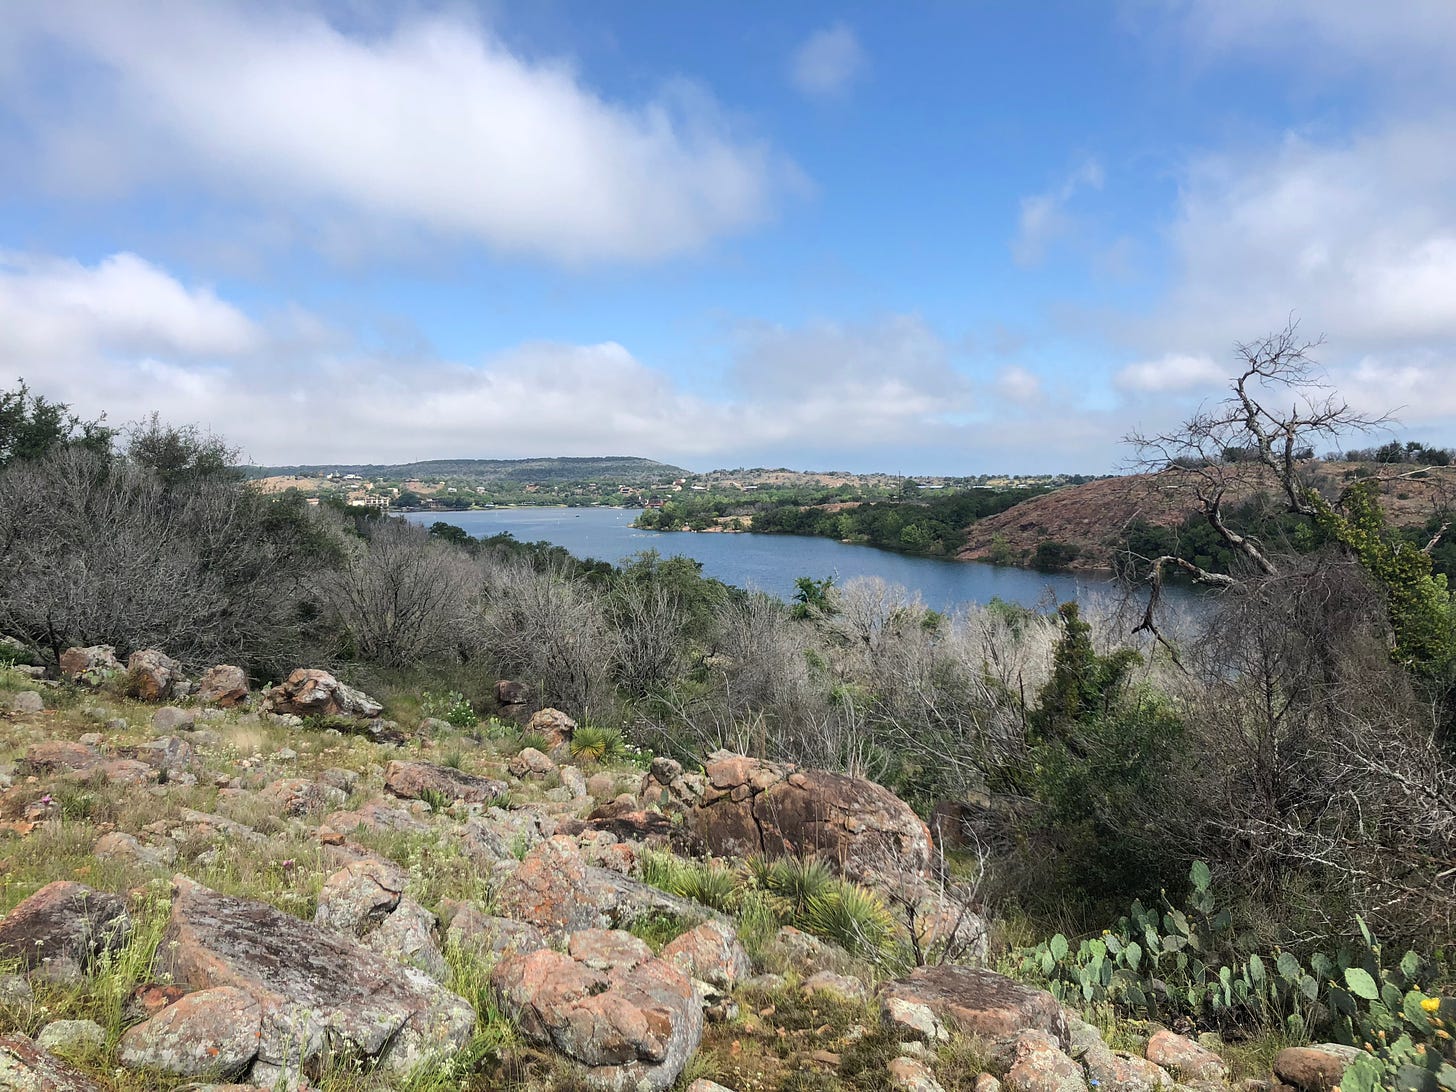 A photo from a trail at Inks Lake State Park depicting a blue body of water, blue sky, and a rocky embankment